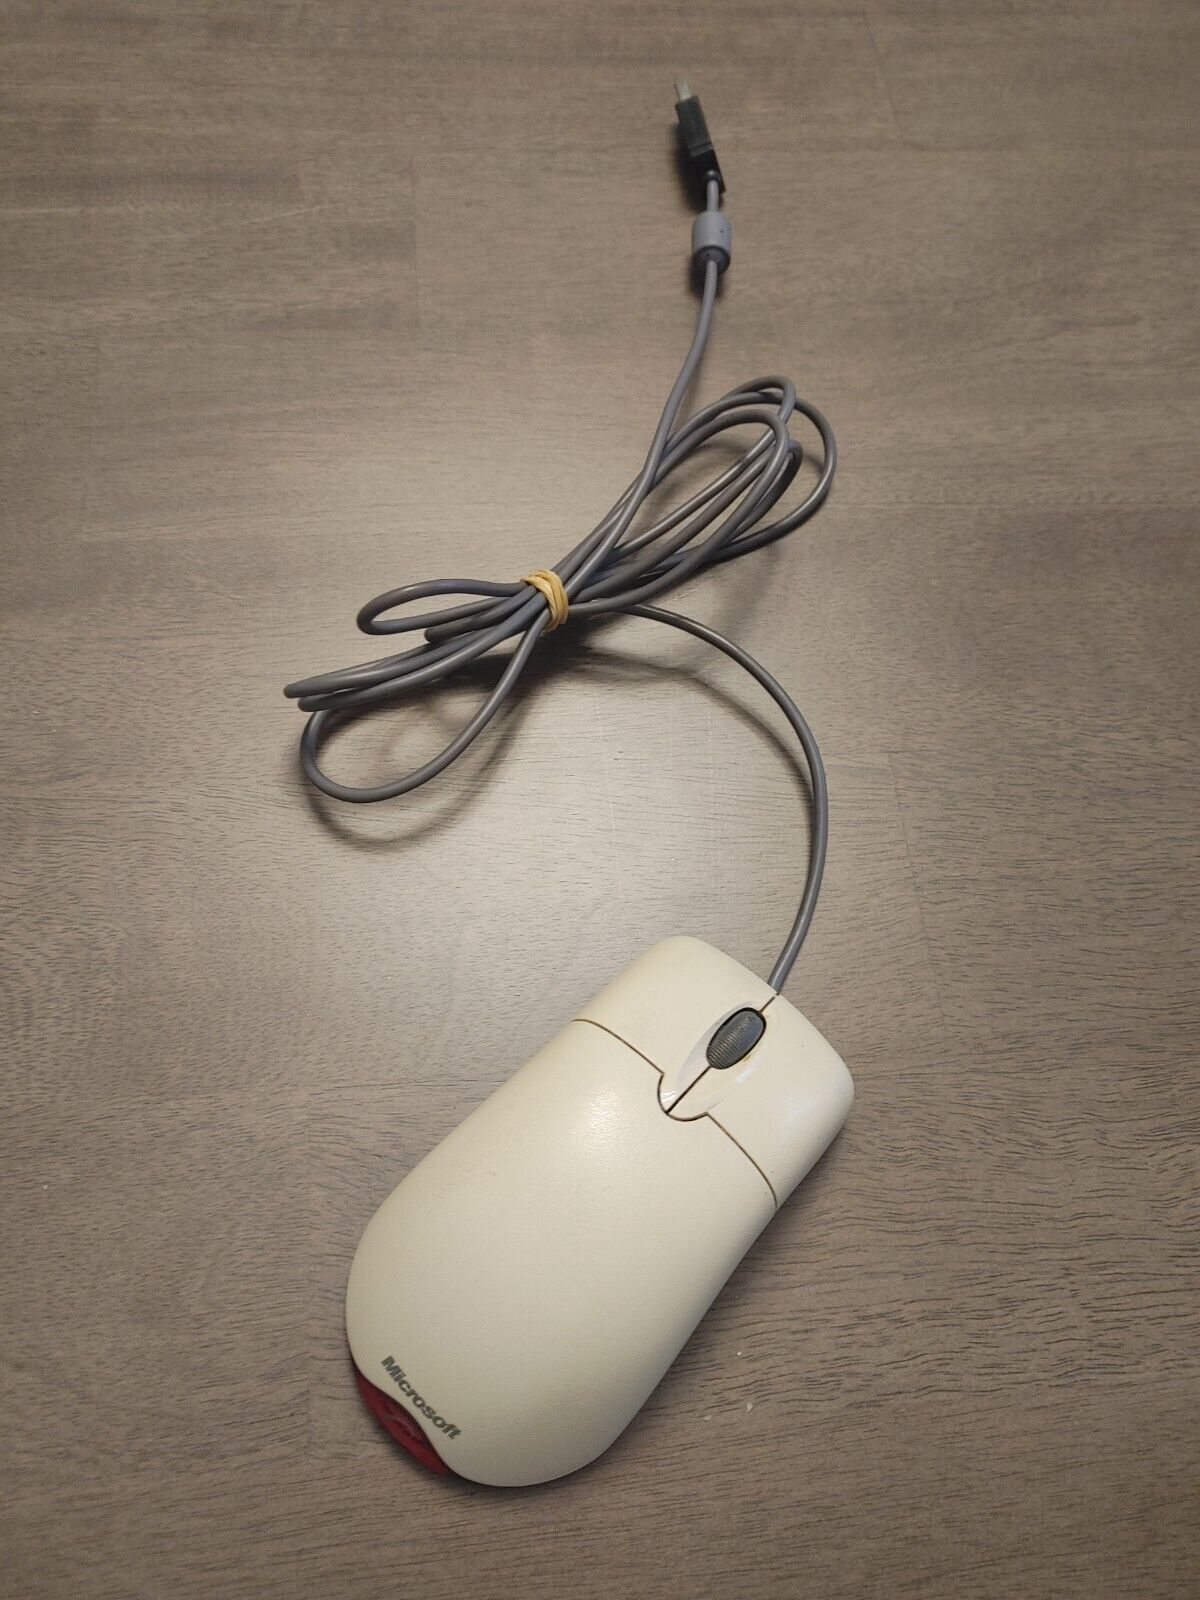 Vintage Off White Microsoft Wheel Mouse Optical USB Mouse 1.1/1.1a - Good Cond